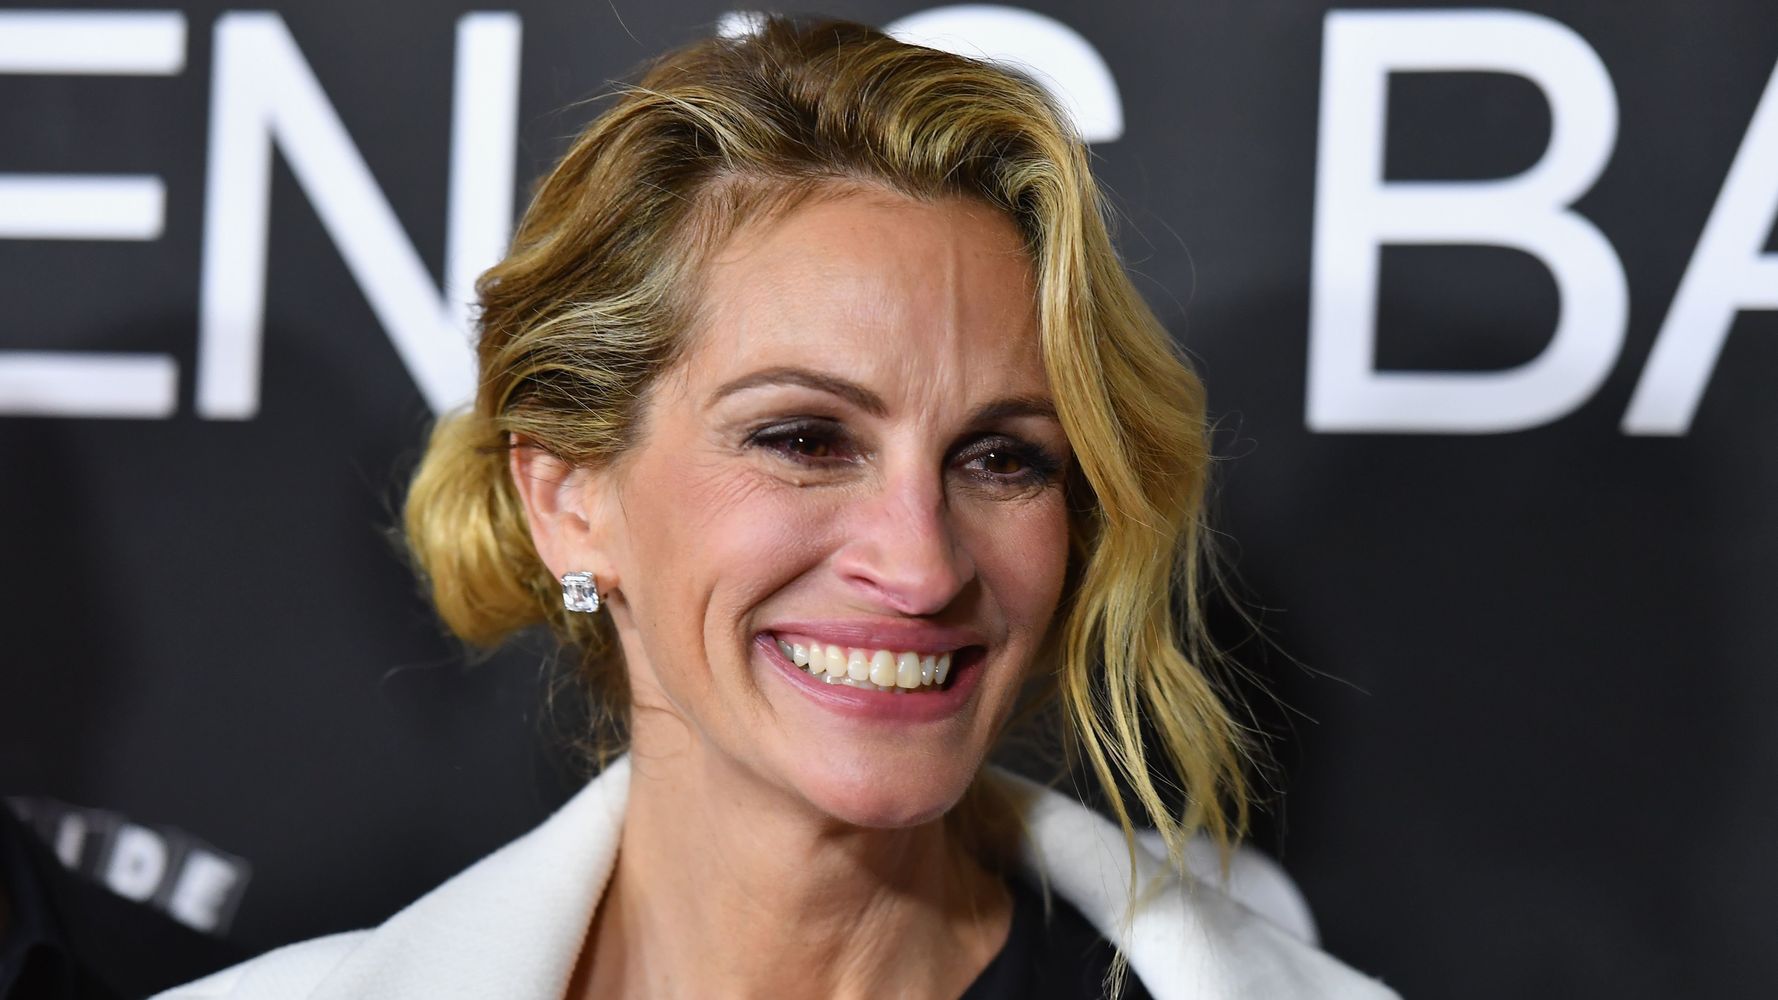 Headline About Julia Roberts Roles Published With Extremely Awkward Typo Huffpost